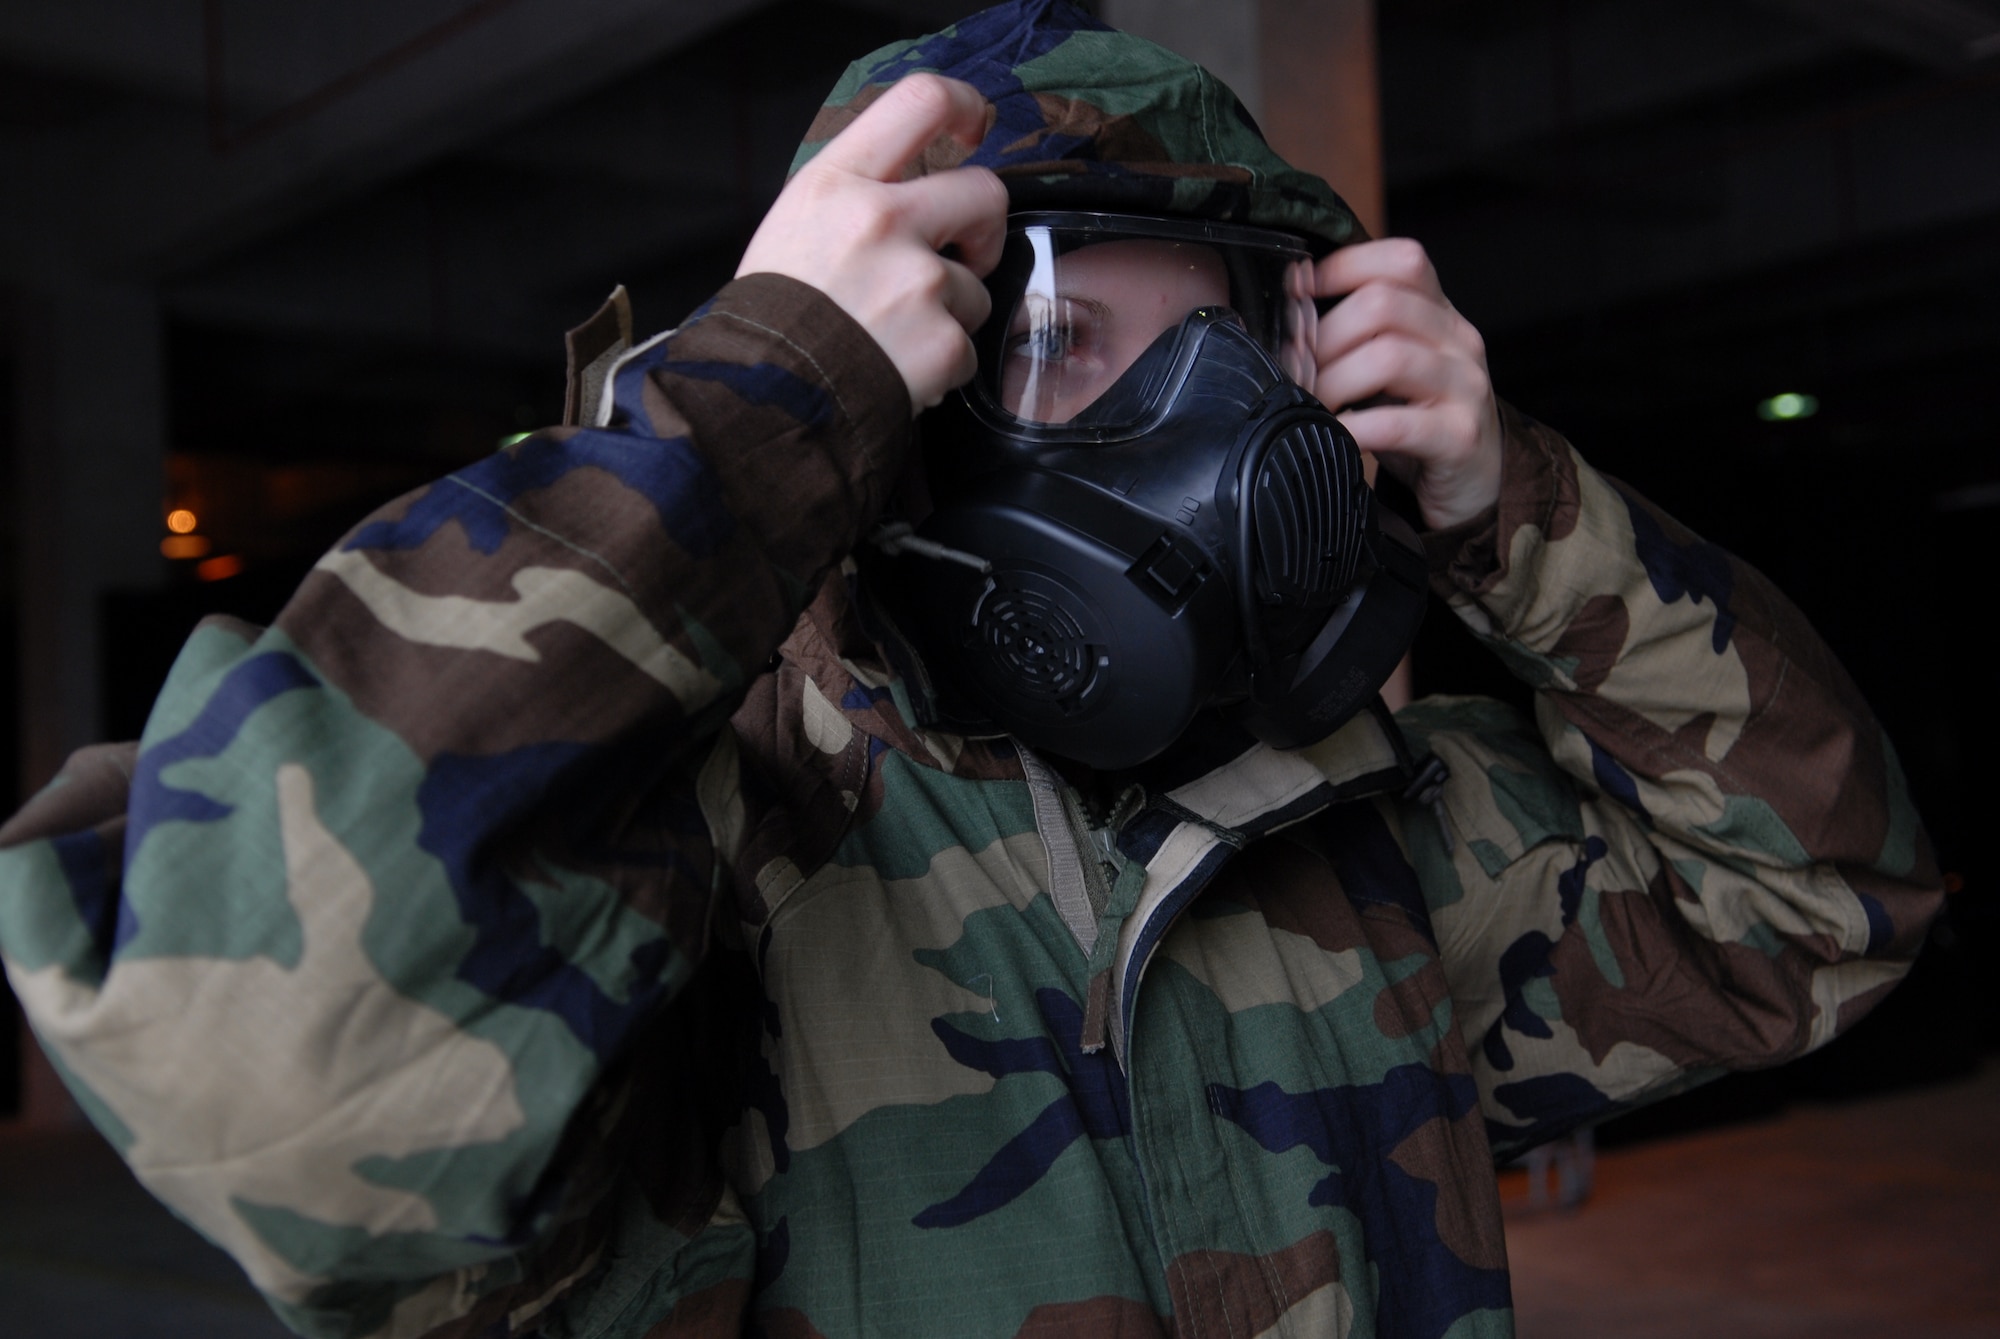 Amn. Heather Landvatter, Individual Protective Equipment flight, 18th Logistics Readiness Squadron, Kadena Air Base, Japan, tries on the new M-50 gas mask as her shop prepares for a base-wide distribution of the new equipment beginning March1, 2009.
(U.S. Air Force photo/Staff Sgt Angelique Perez)